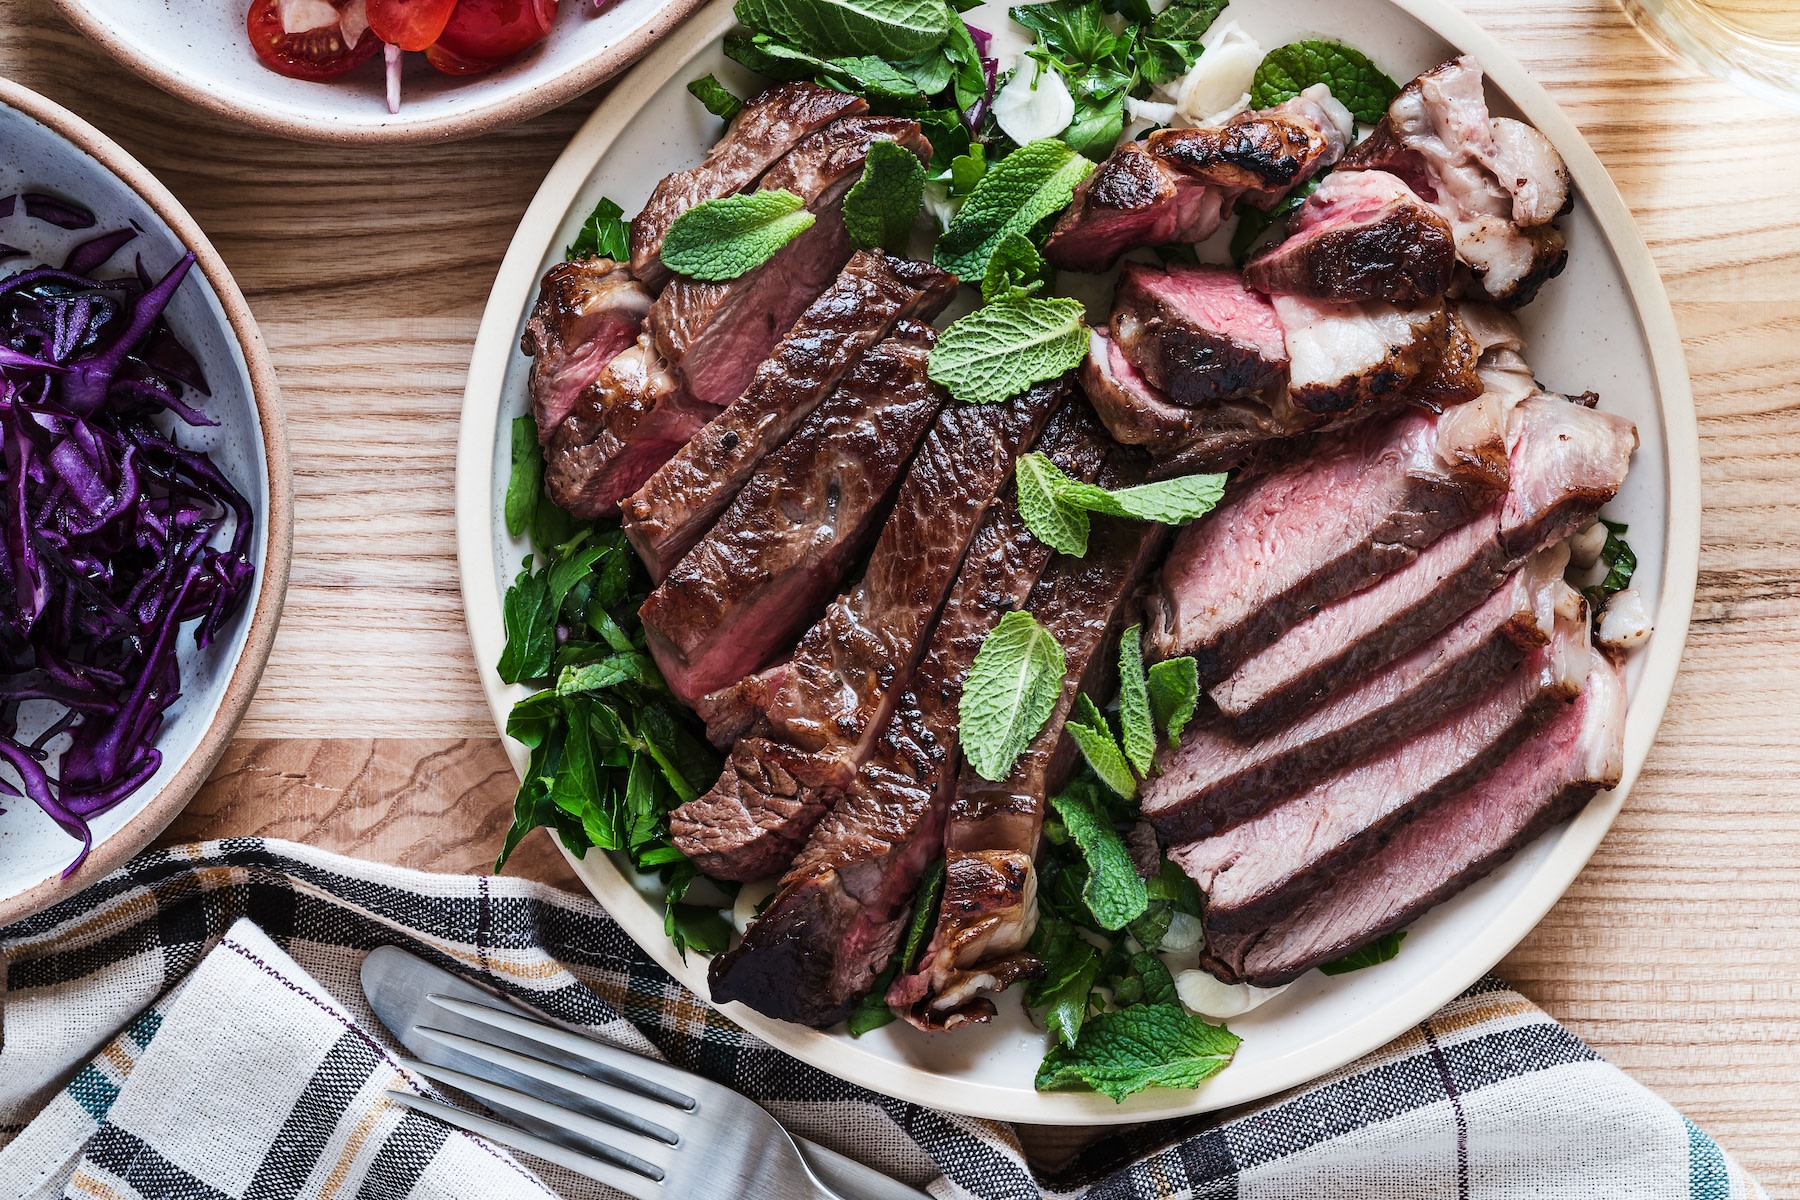 A plate of cooked steak cut up and arranged on a plate with greens. Learn how much protein is too much in this article.